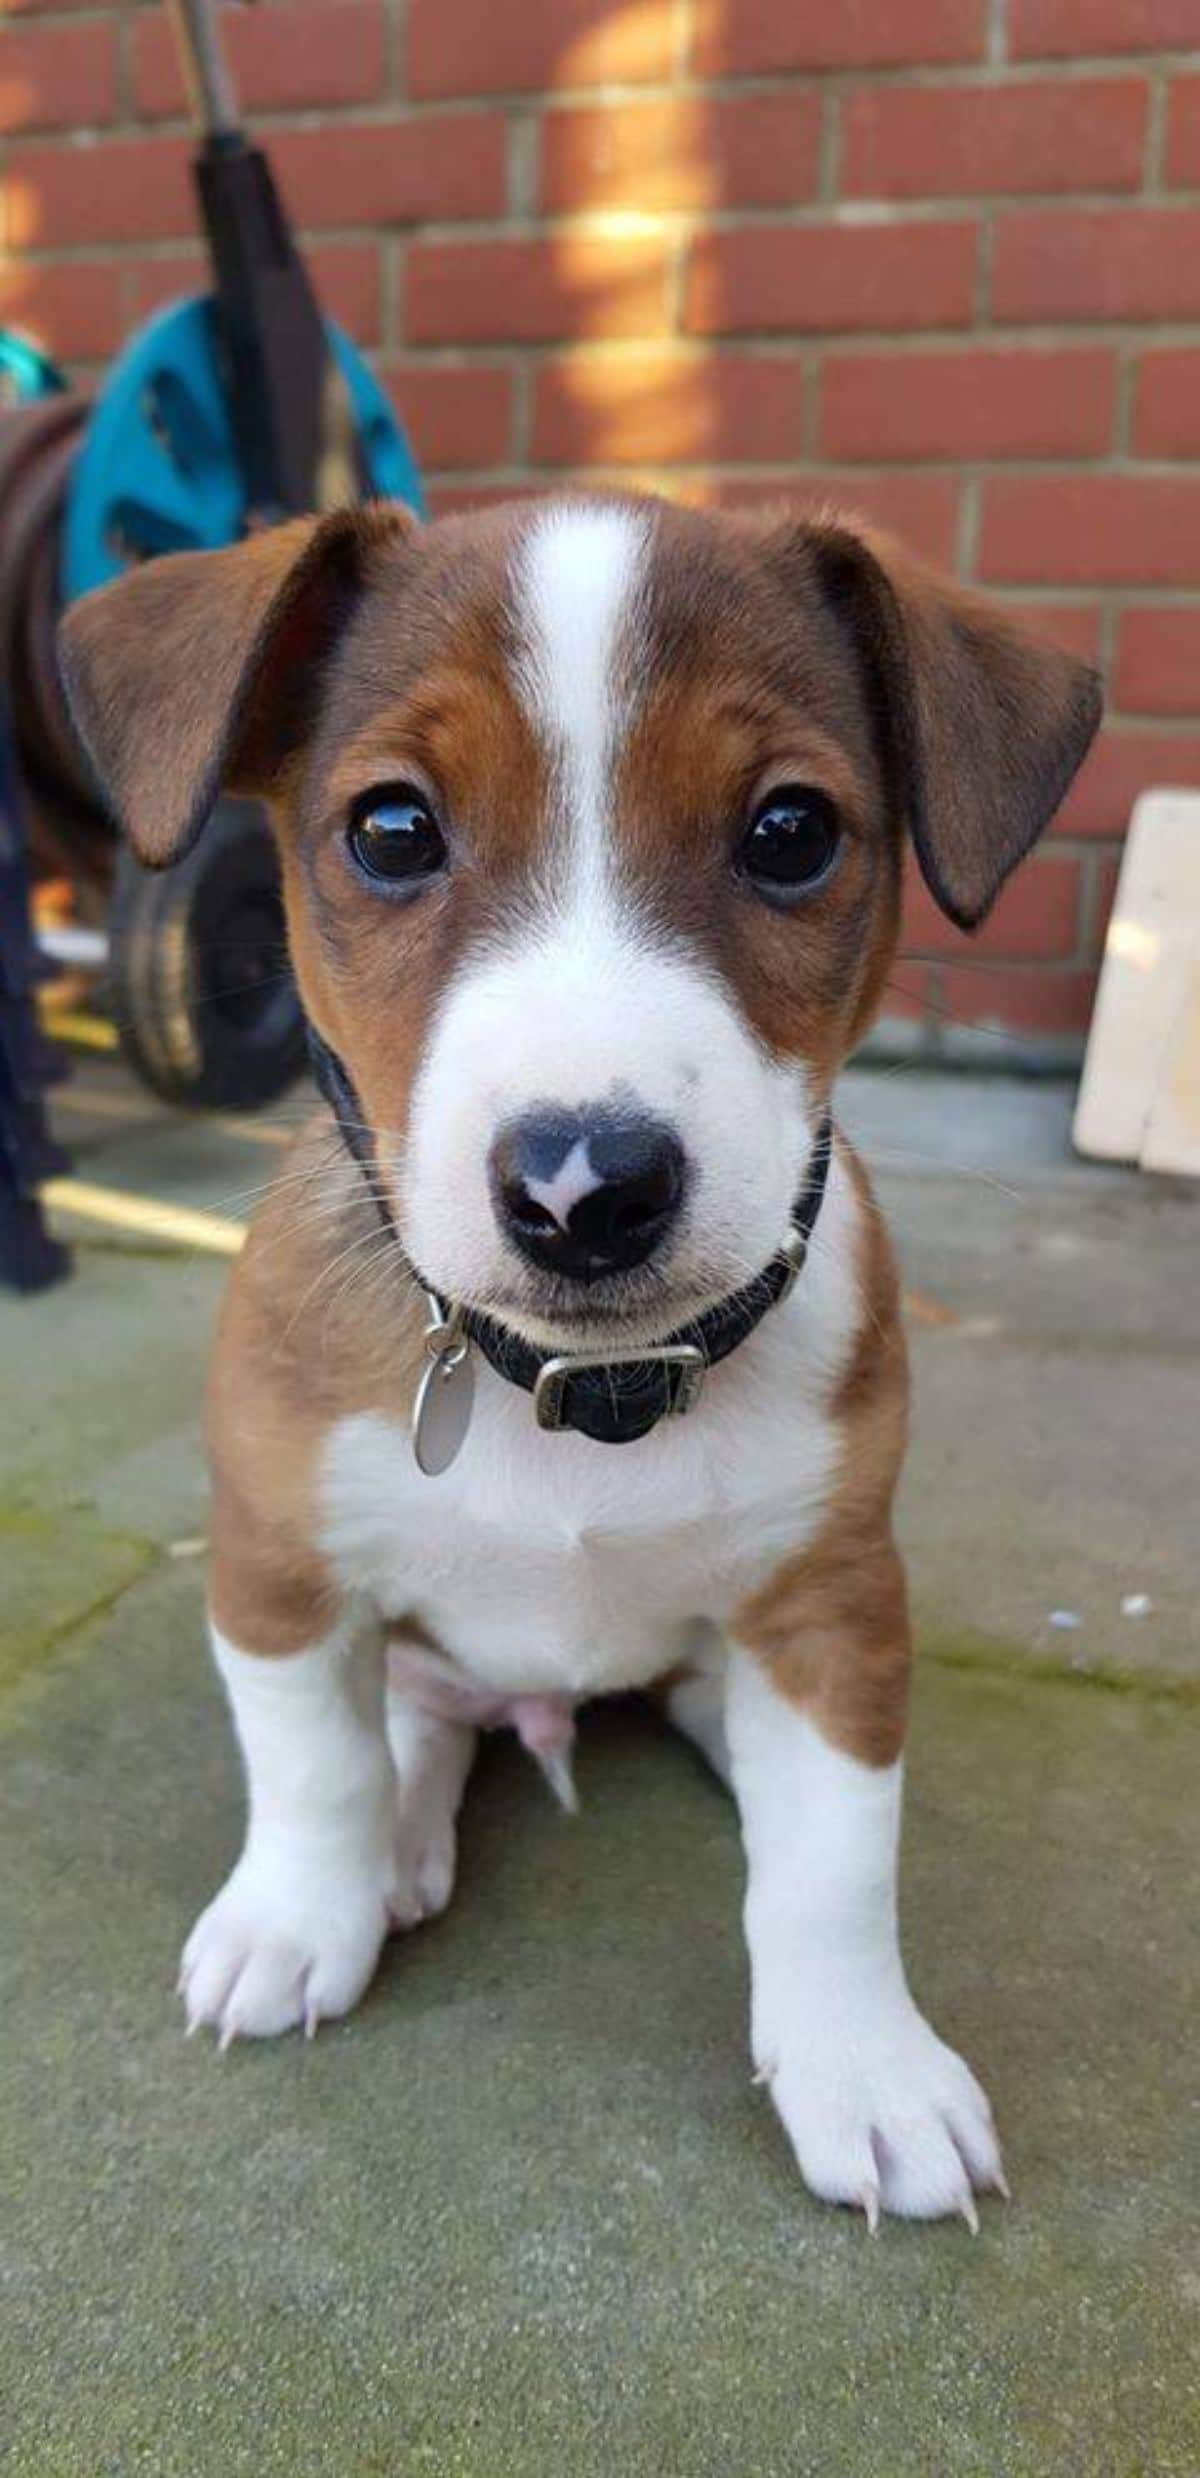 brown and white puppy wearing a black and silver collar sitting on the ground